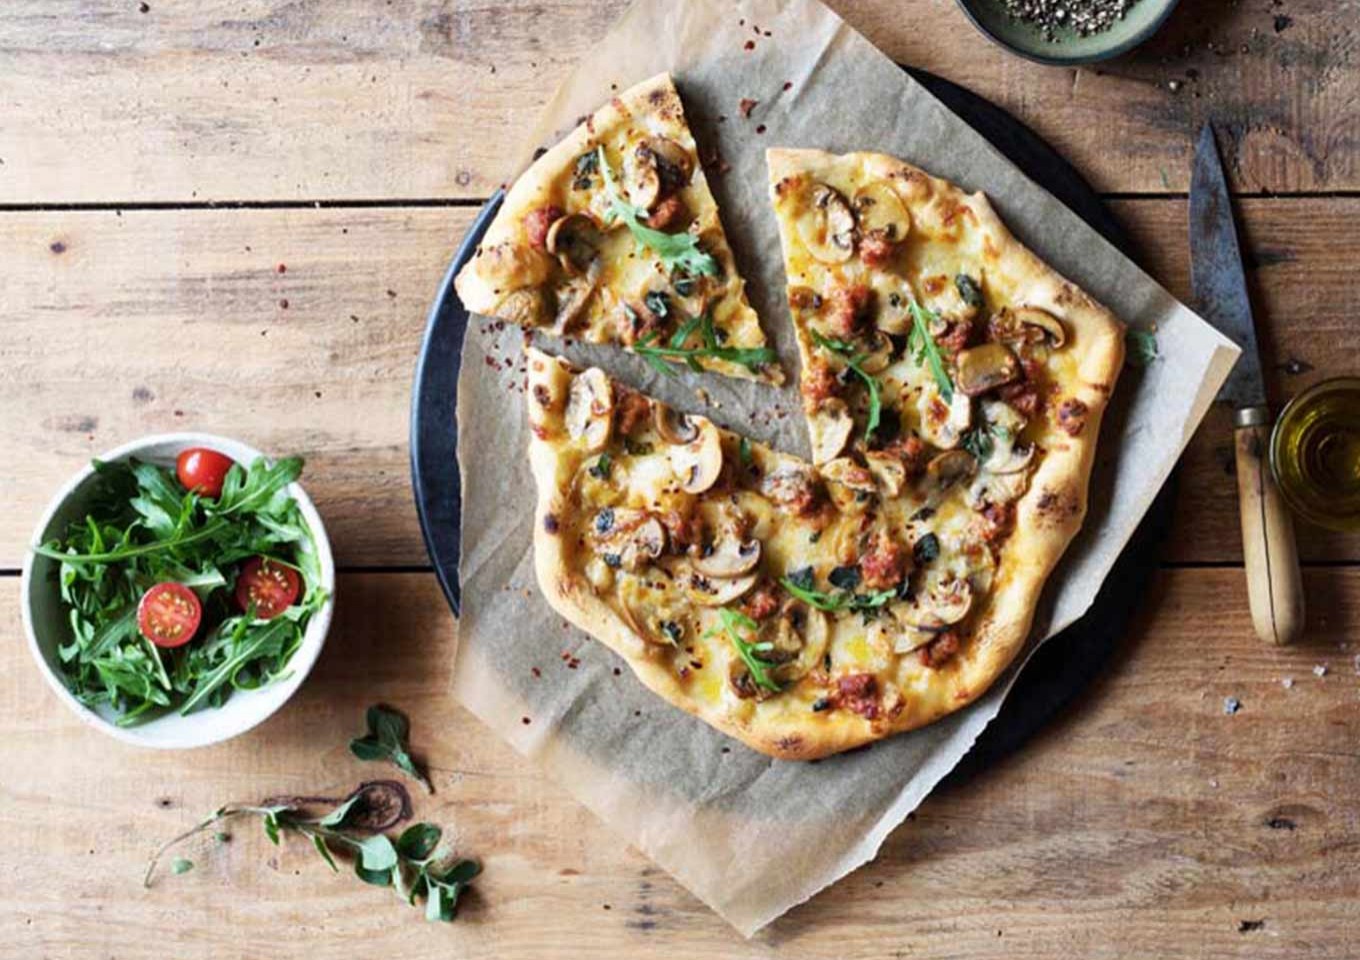 Mushroom and sausage pizza with chilli